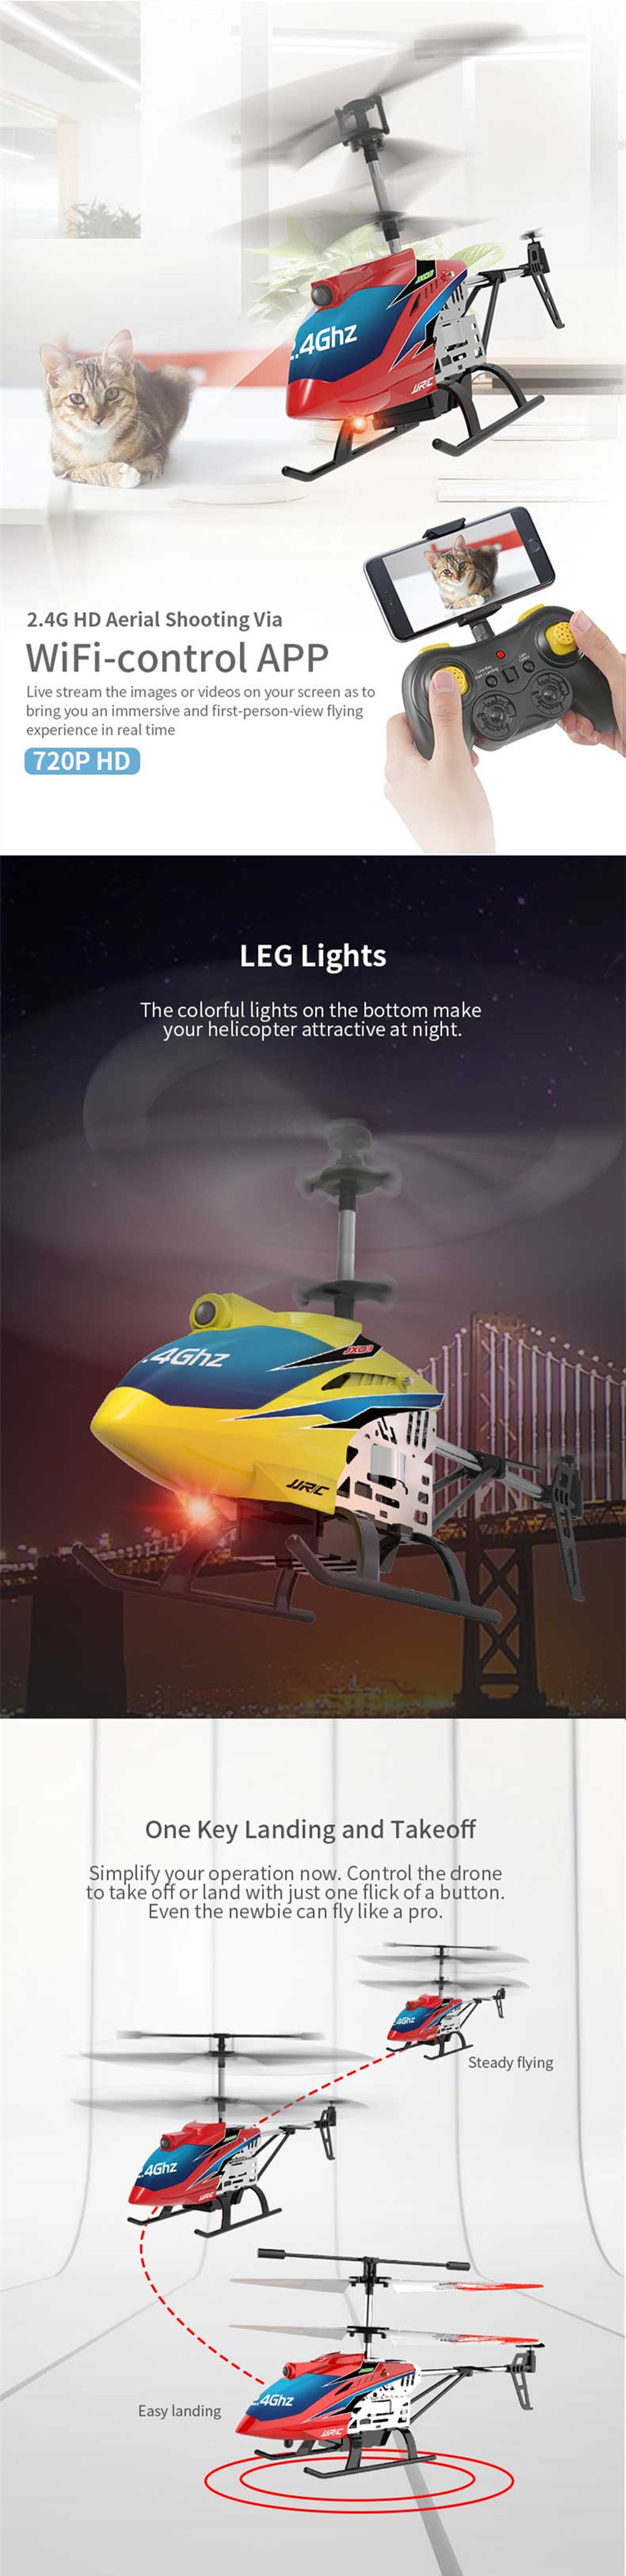 JJRC GAZE JX03 2.4G 4CH Altitude Hold Hover One-key Takeoff RC Helicopter RTF With 720P HD Camera - Photo: 2